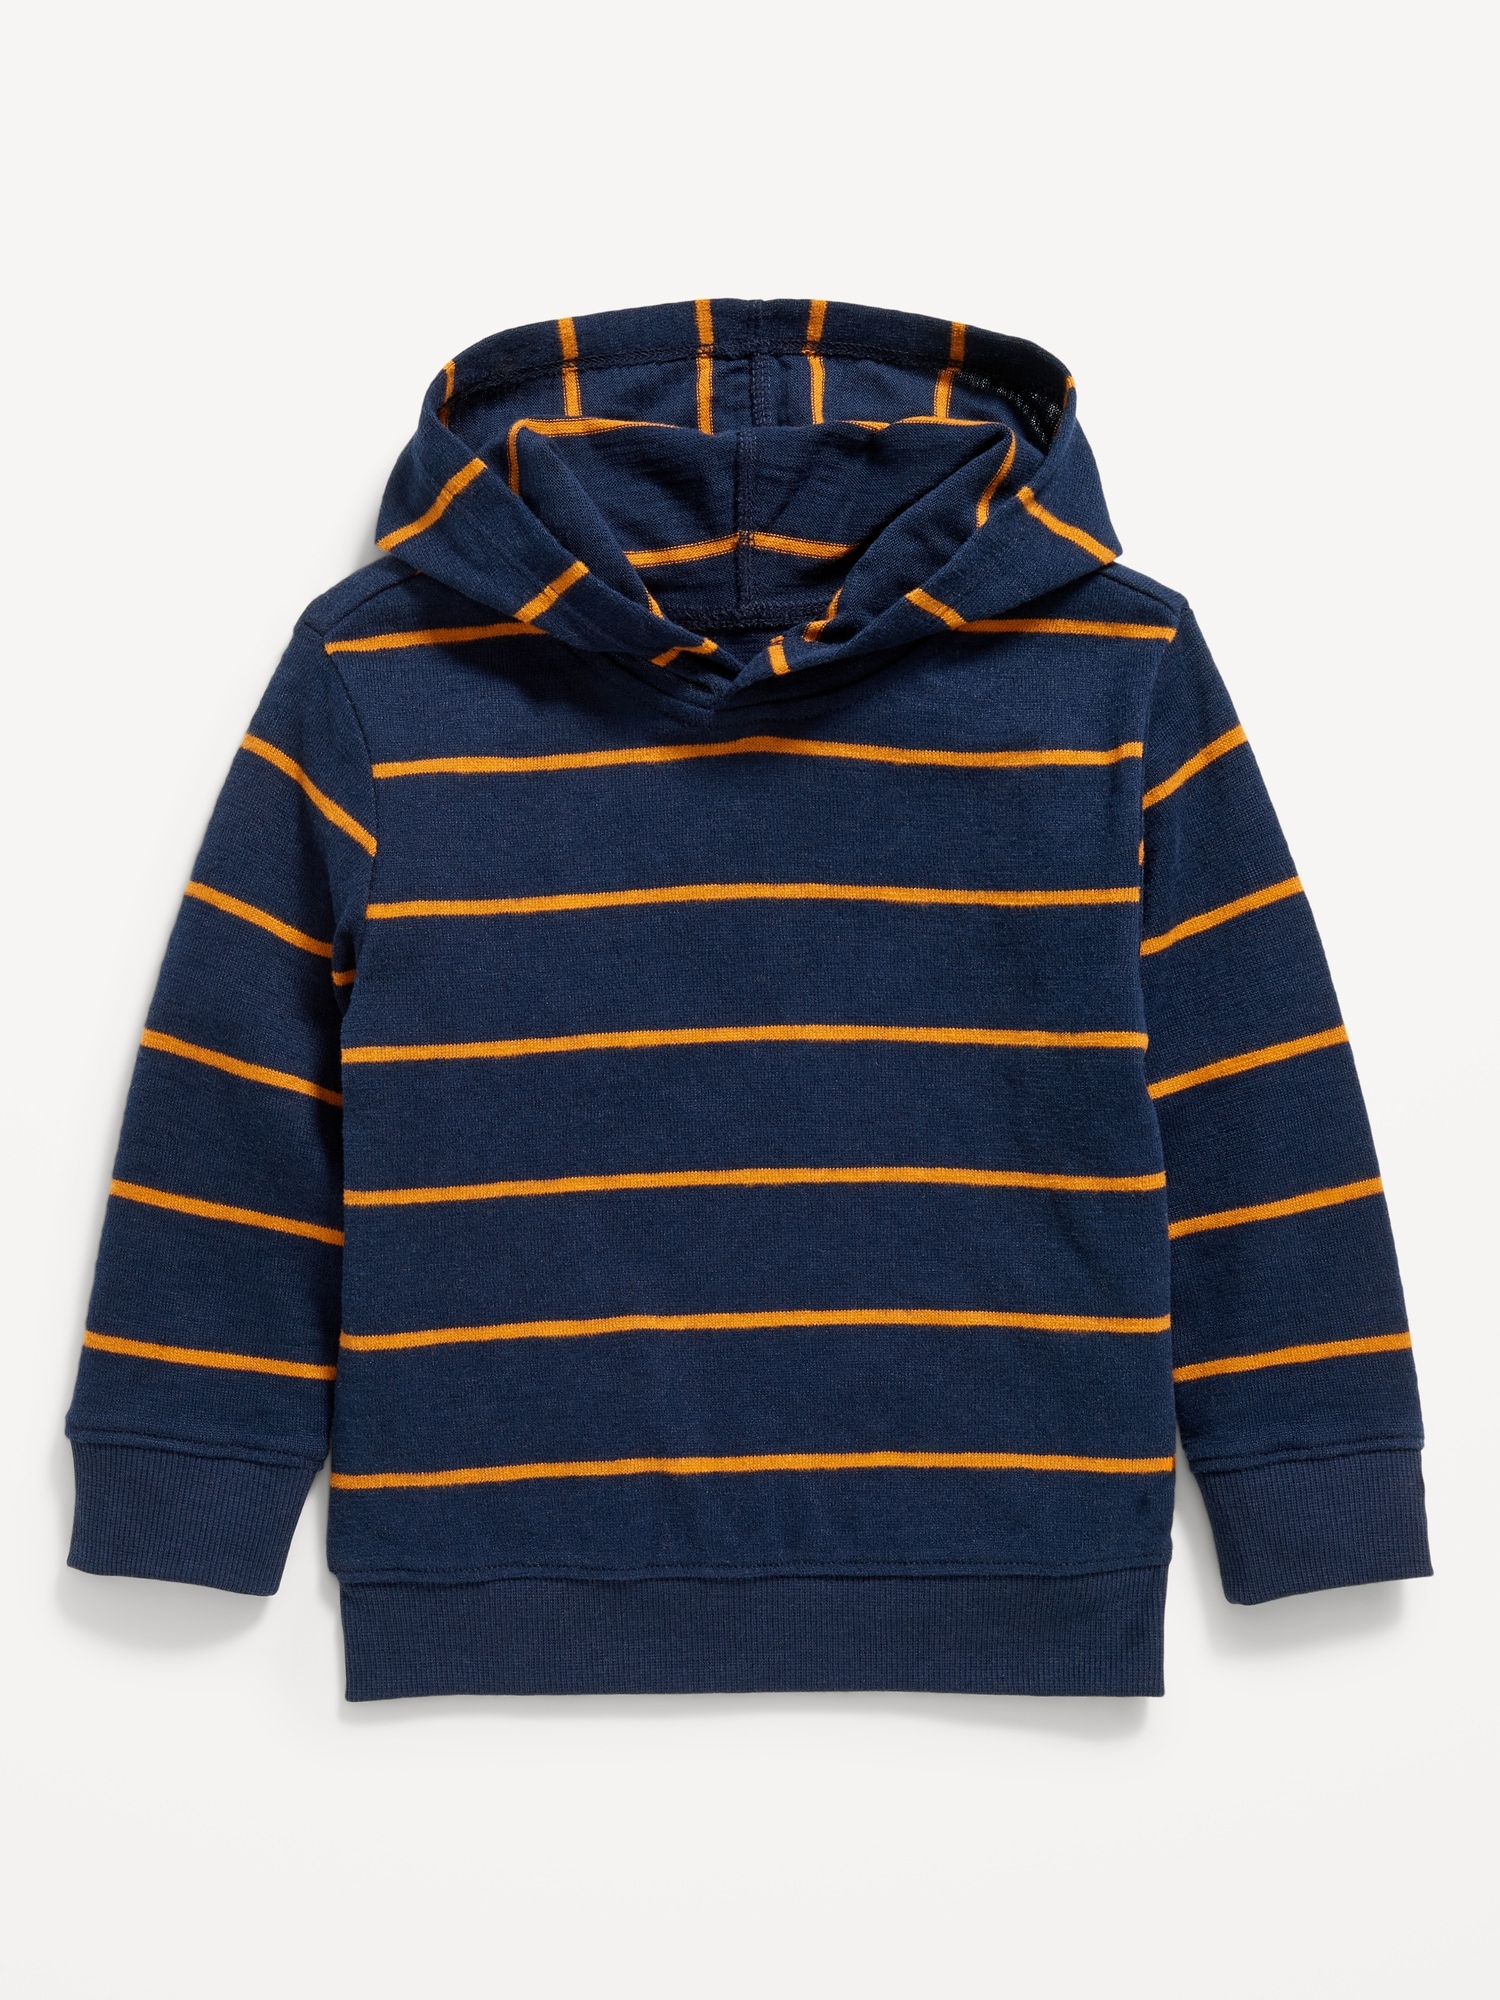 Striped Cozy-Knit Pullover Hoodie for Toddler Boys